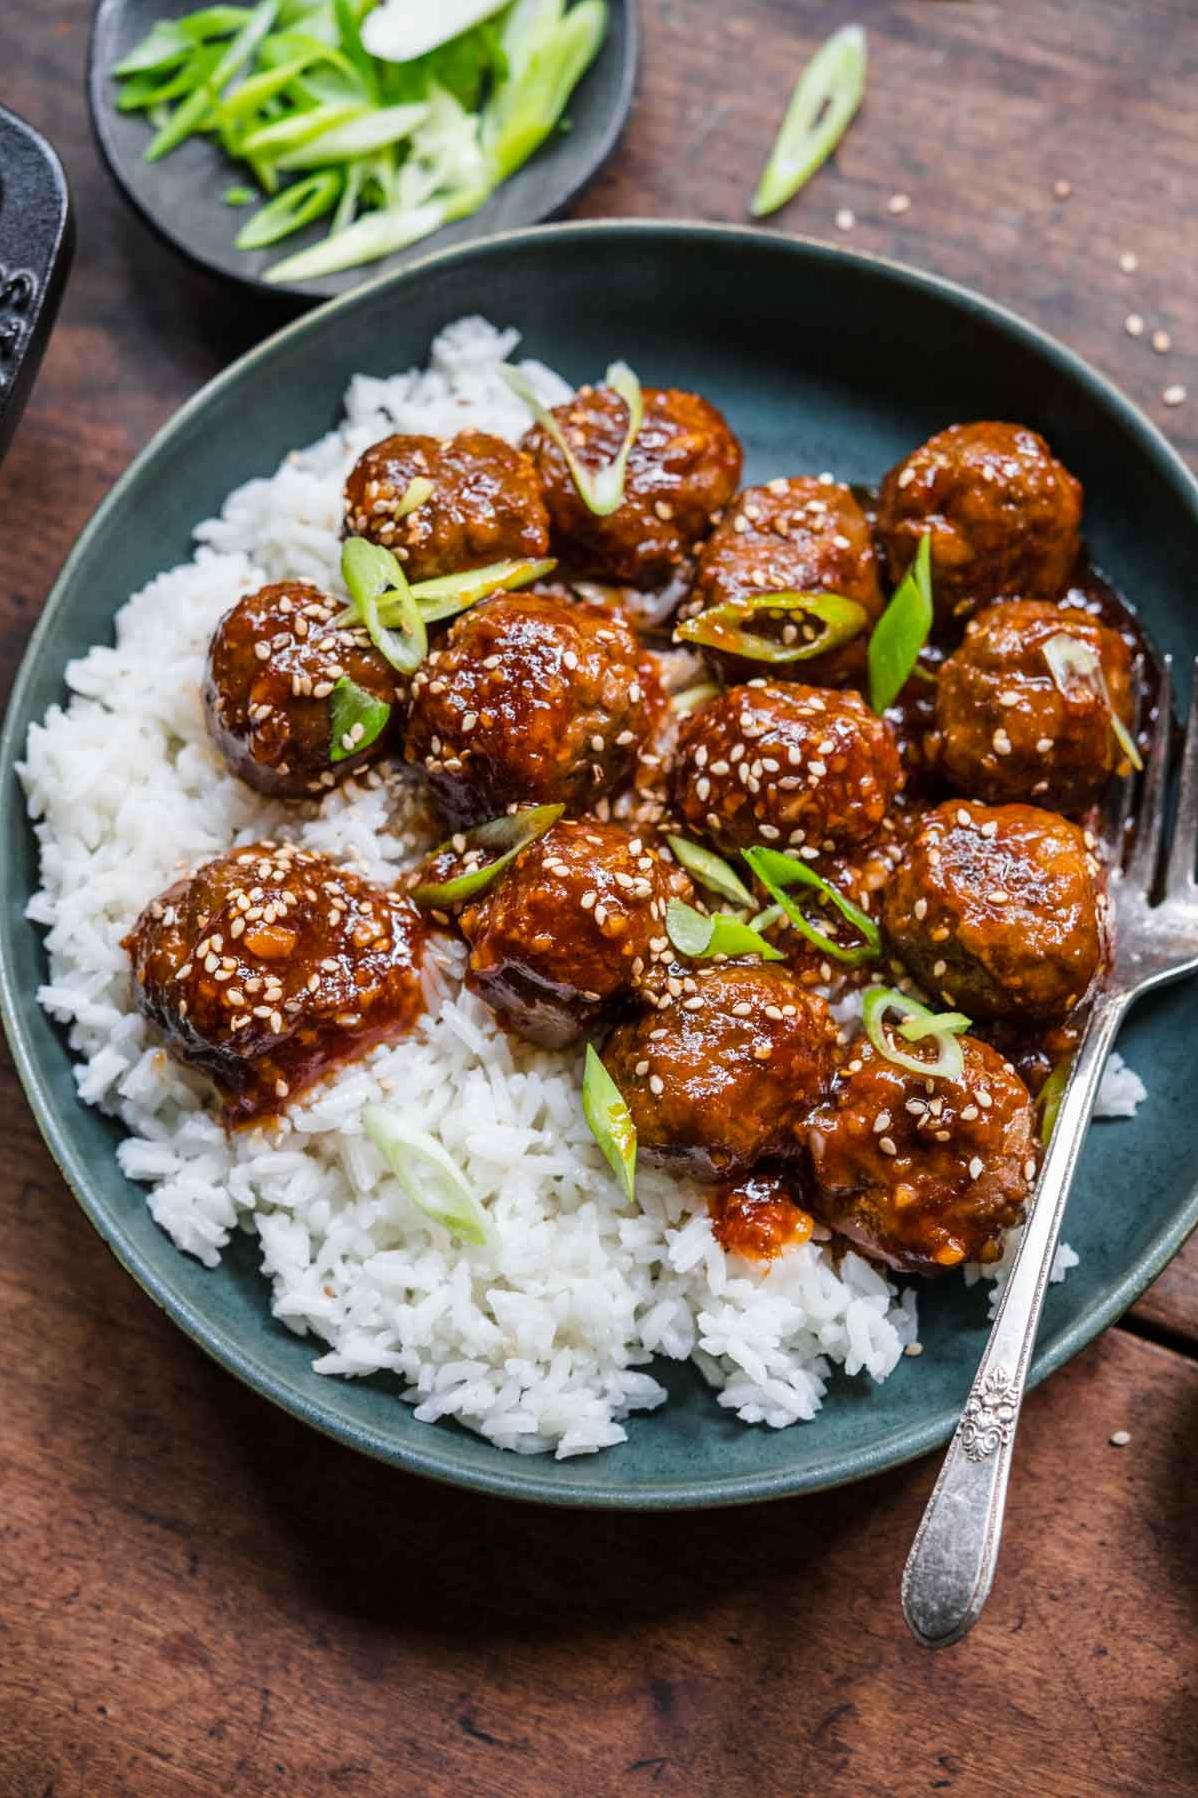  Looking for a delicious appetizer? These kosher meatballs are the answer.